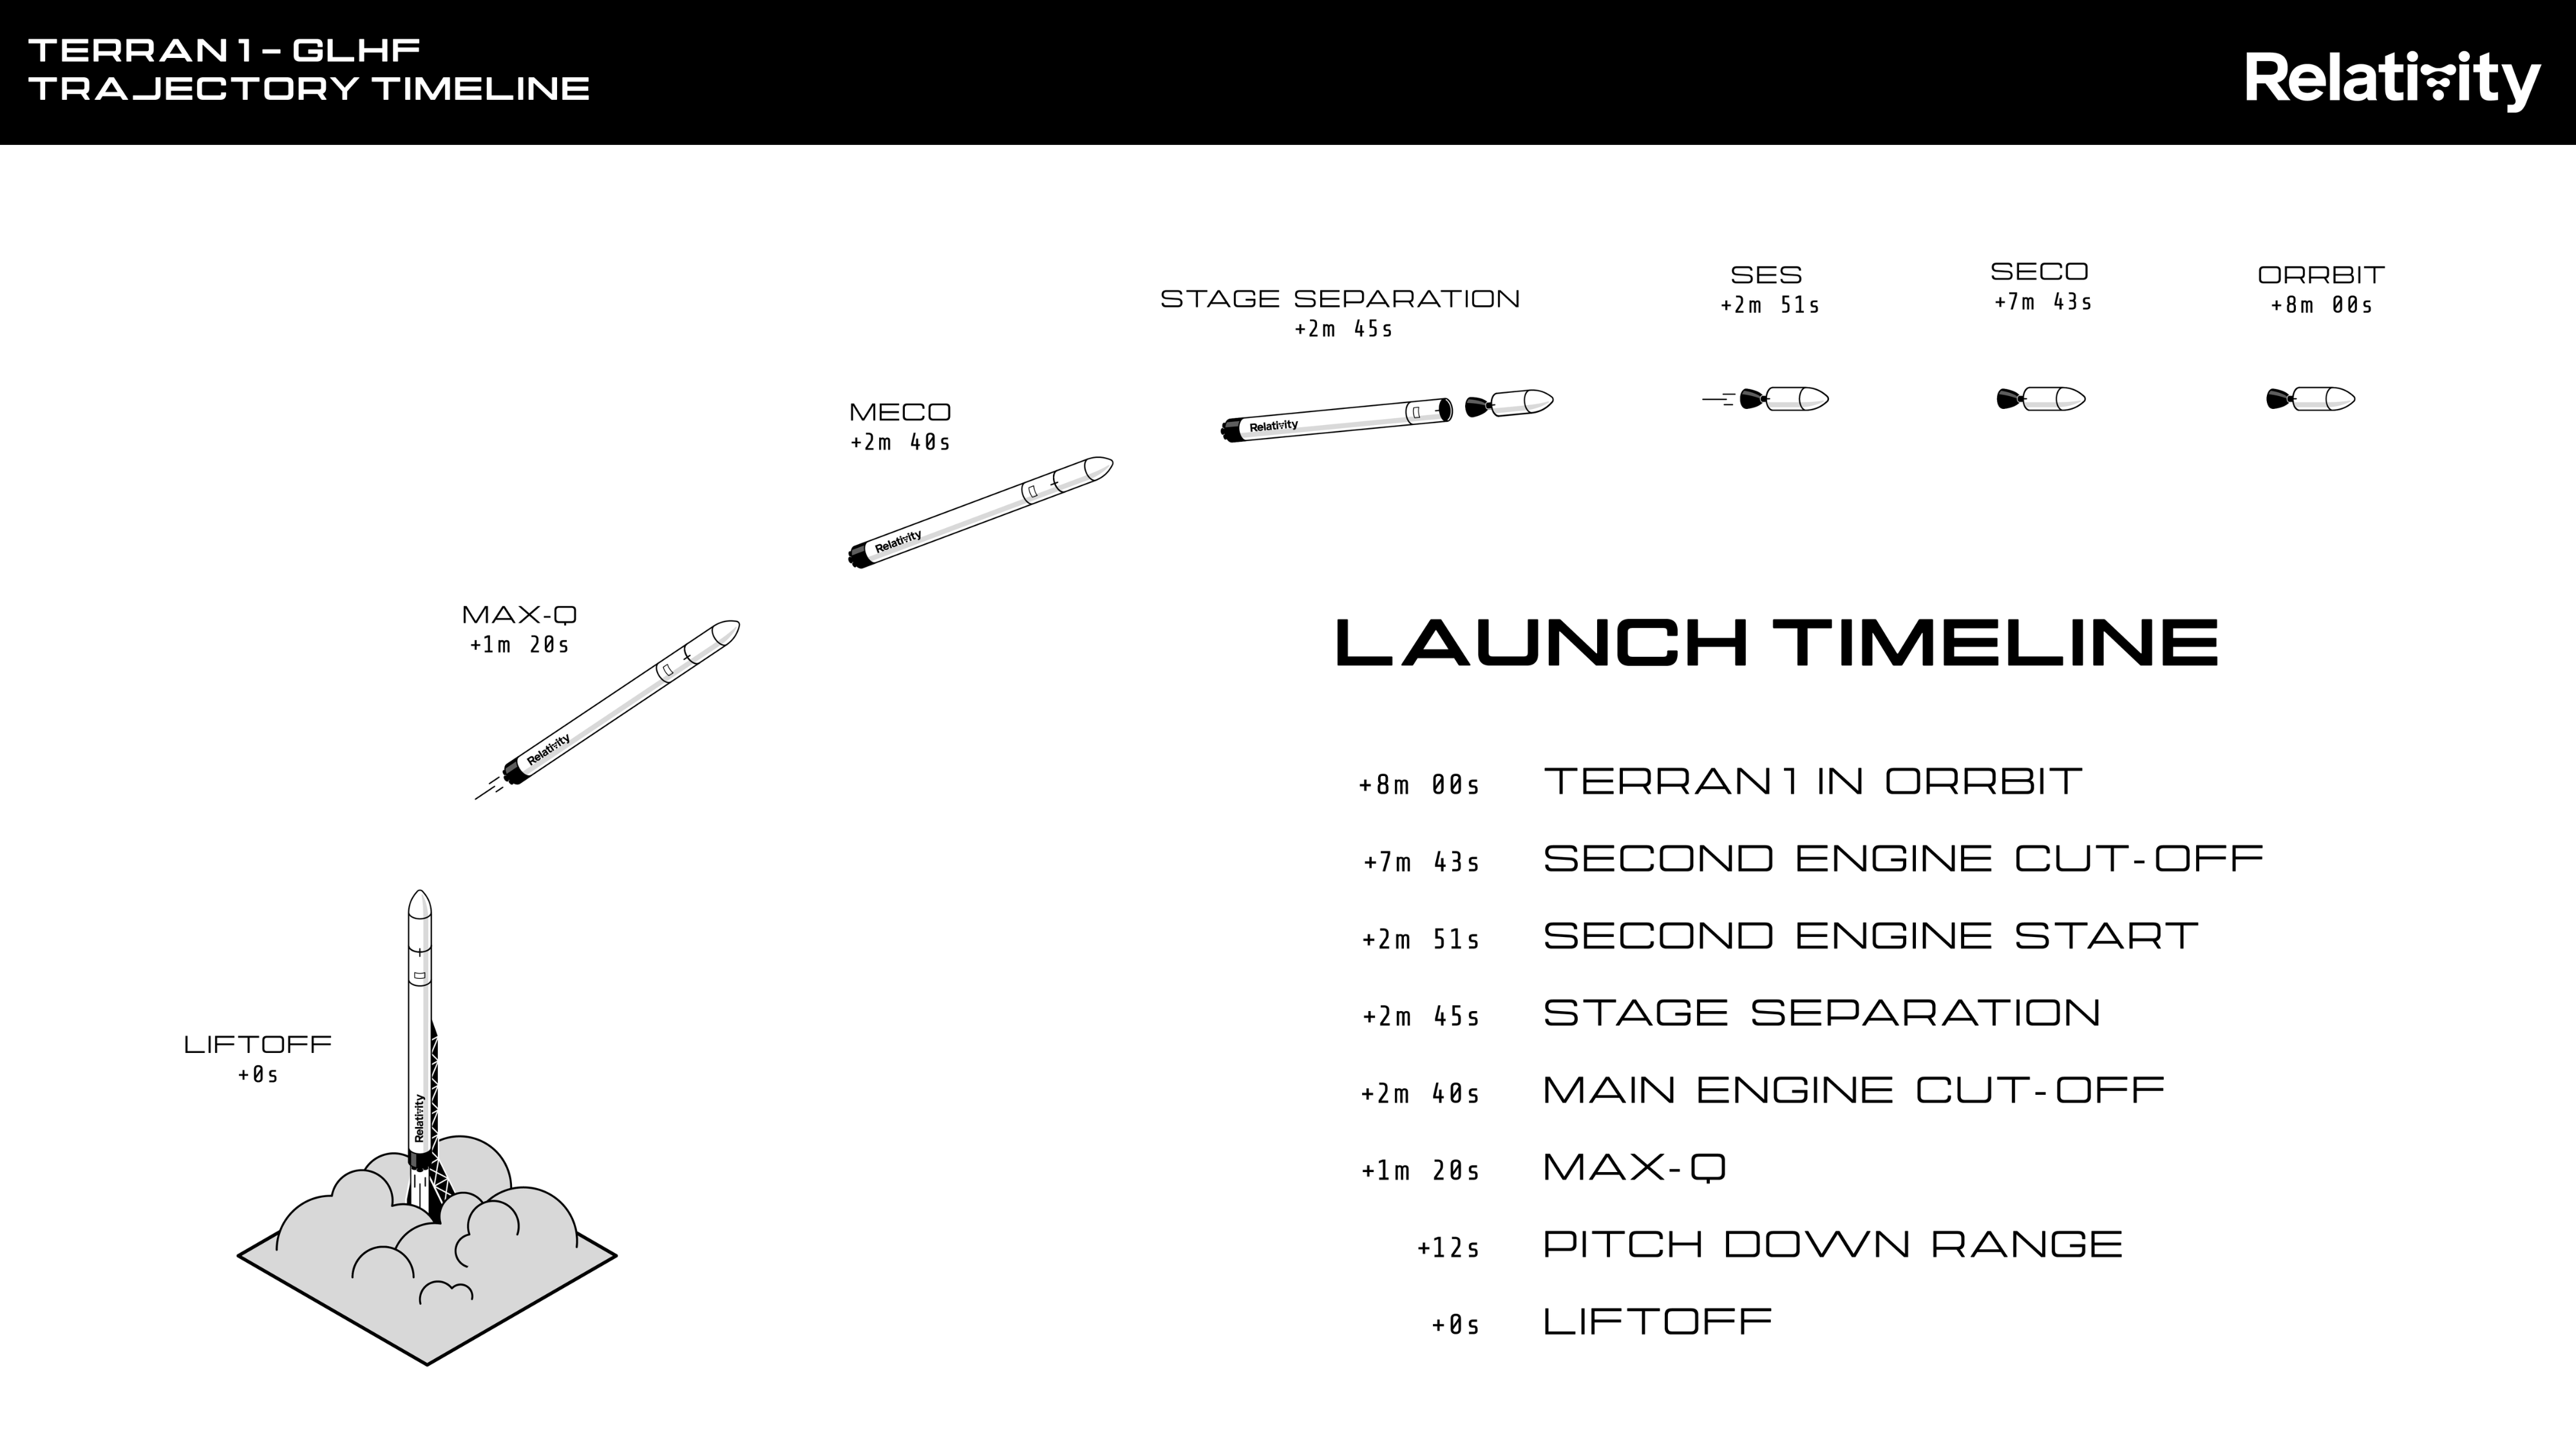 Launch timeline. (Graphic: Relativity Space)